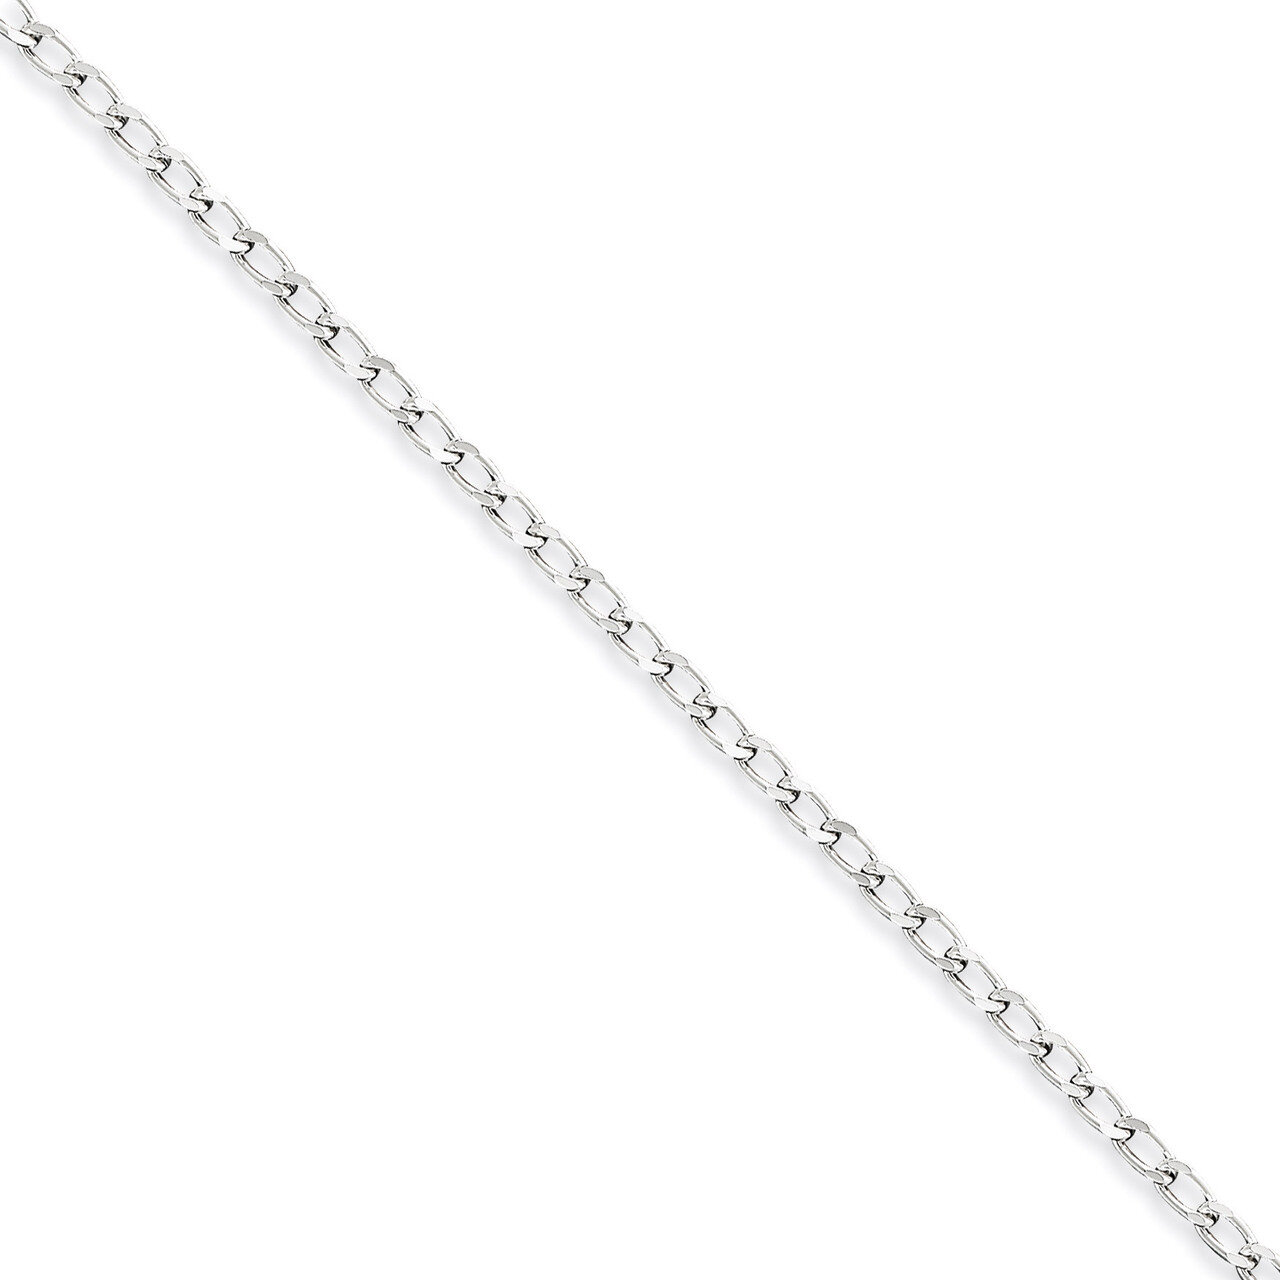 7 Inch 2.8mm Open Link Chain Sterling Silver QLL080-7